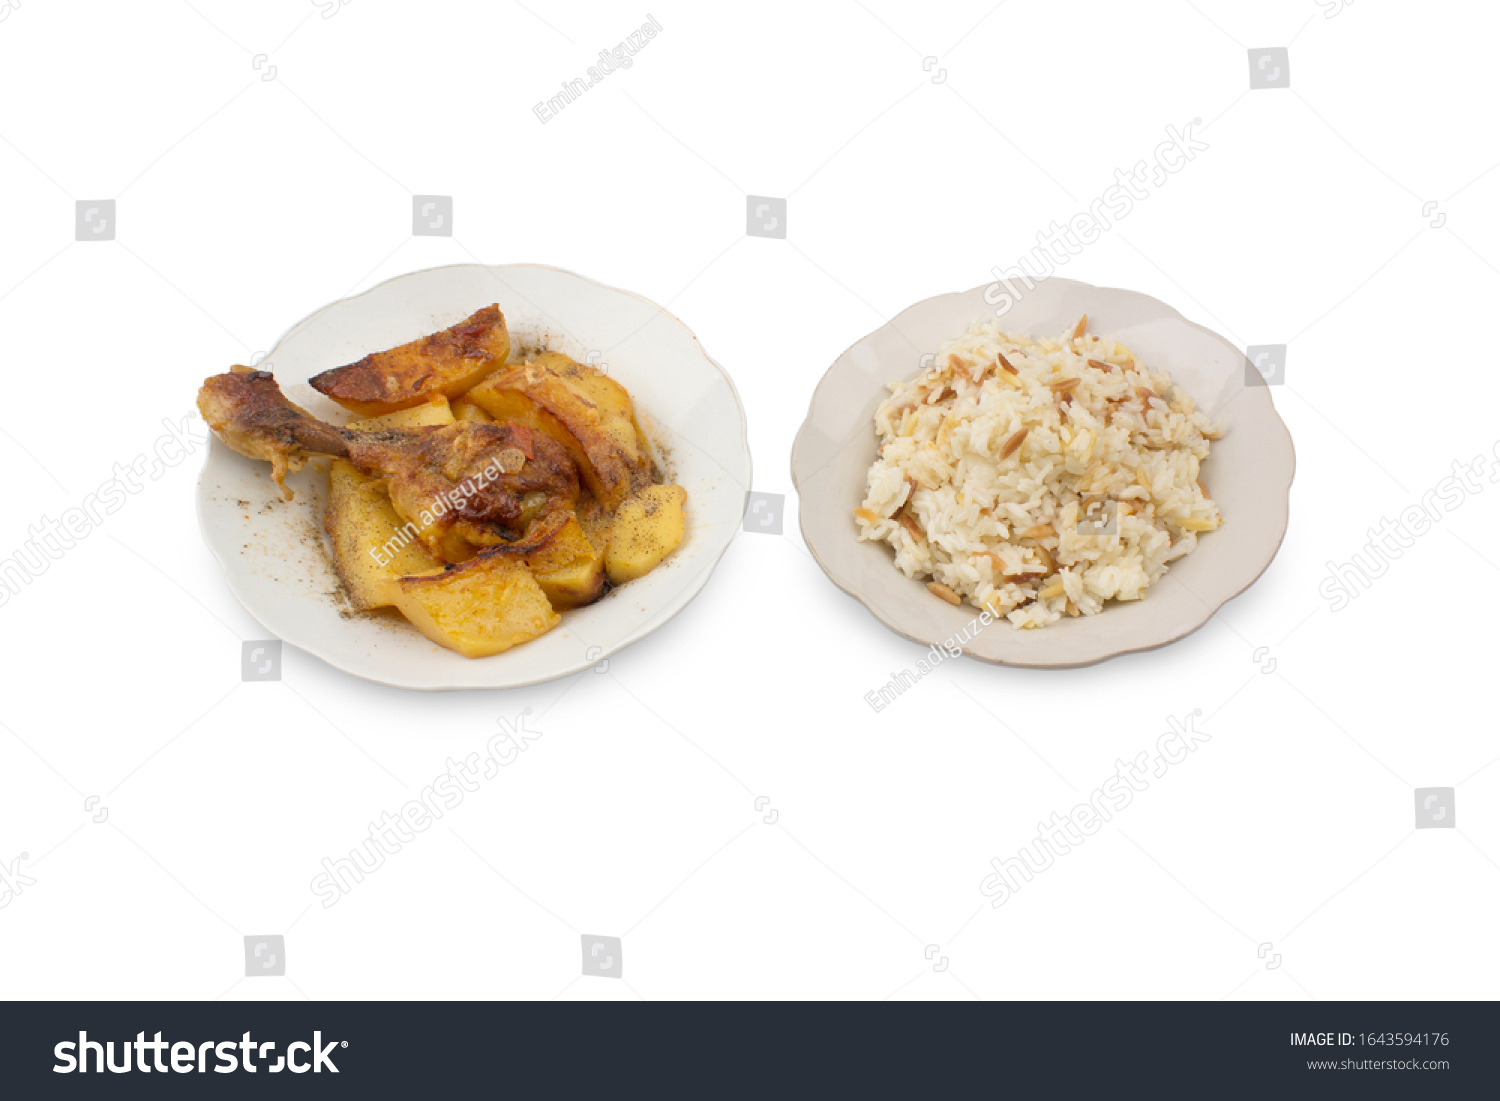 Rice and chicken dish. Chicken dish with potatoes. Rice dish. Turkish foods. In two separate porcelain dishes. Shooting isolated on white background. Studio shoot. #1643594176